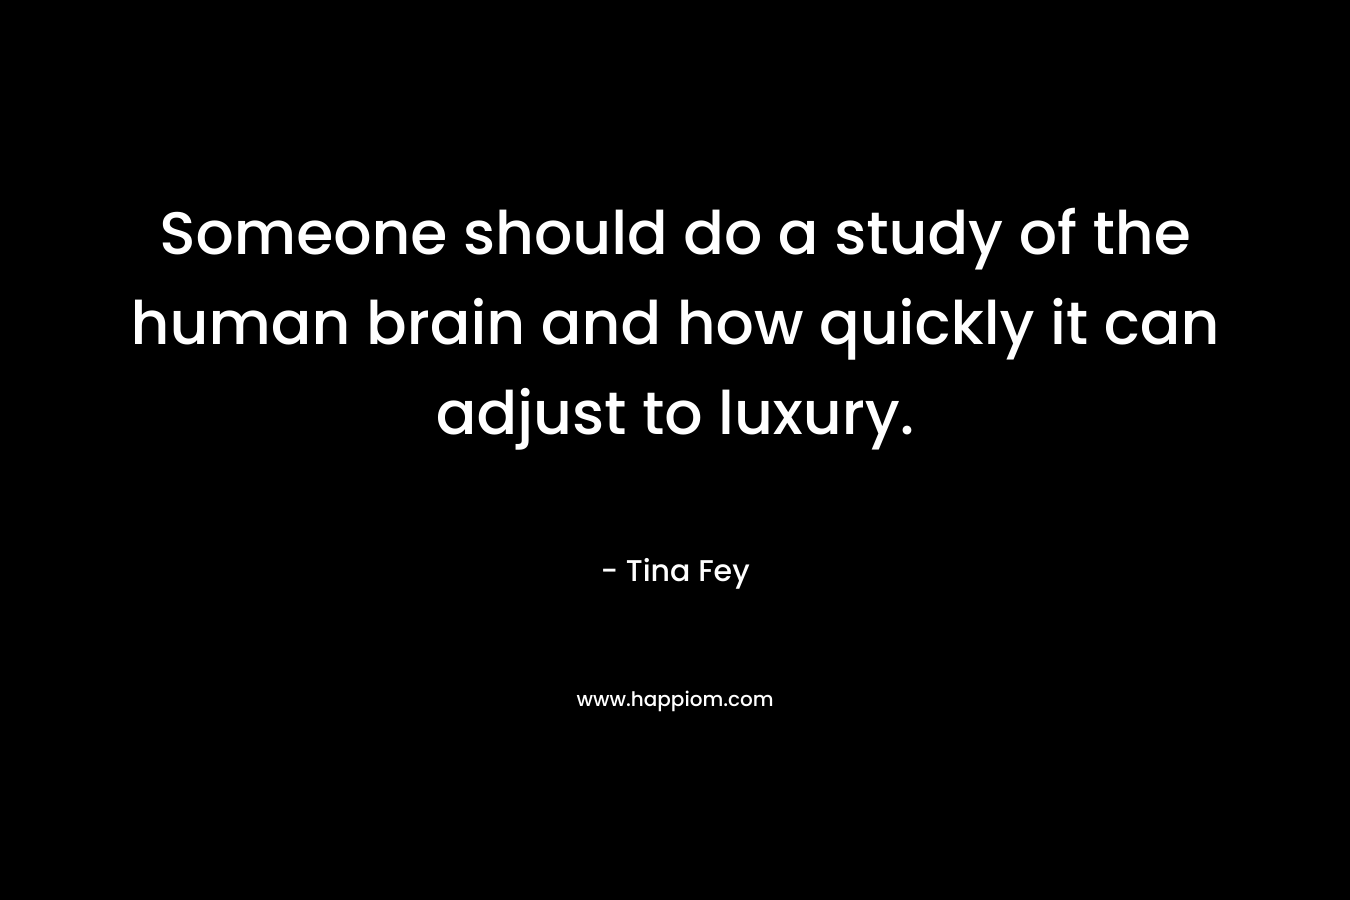 Someone should do a study of the human brain and how quickly it can adjust to luxury.